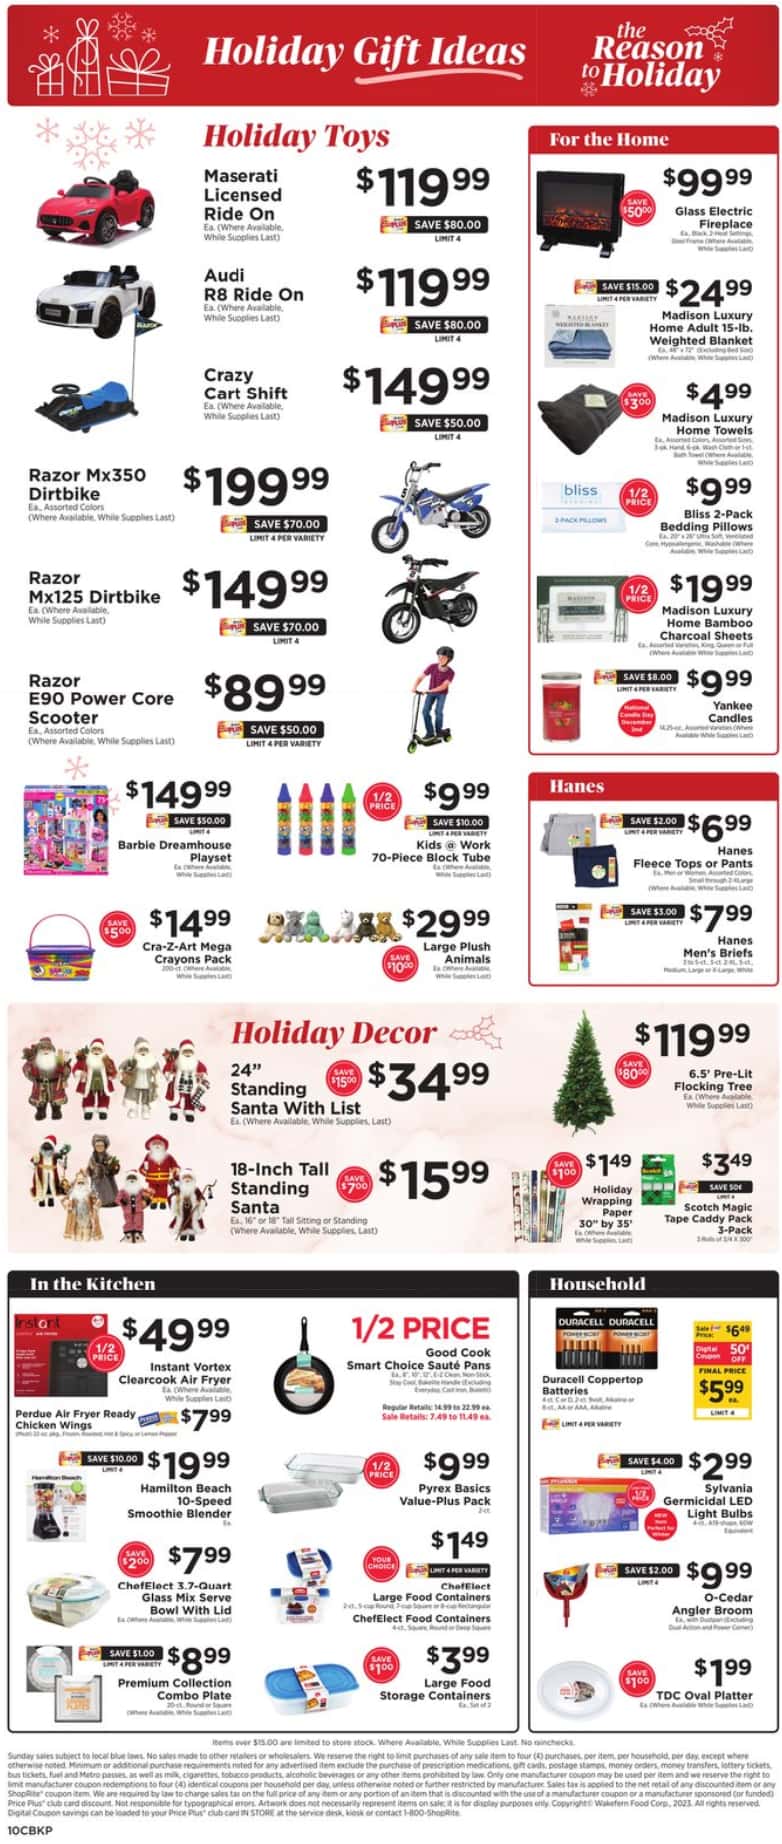 Shoprite Black Friday July 2024 Weekly Sales, Deals, Discounts and Digital Coupons.